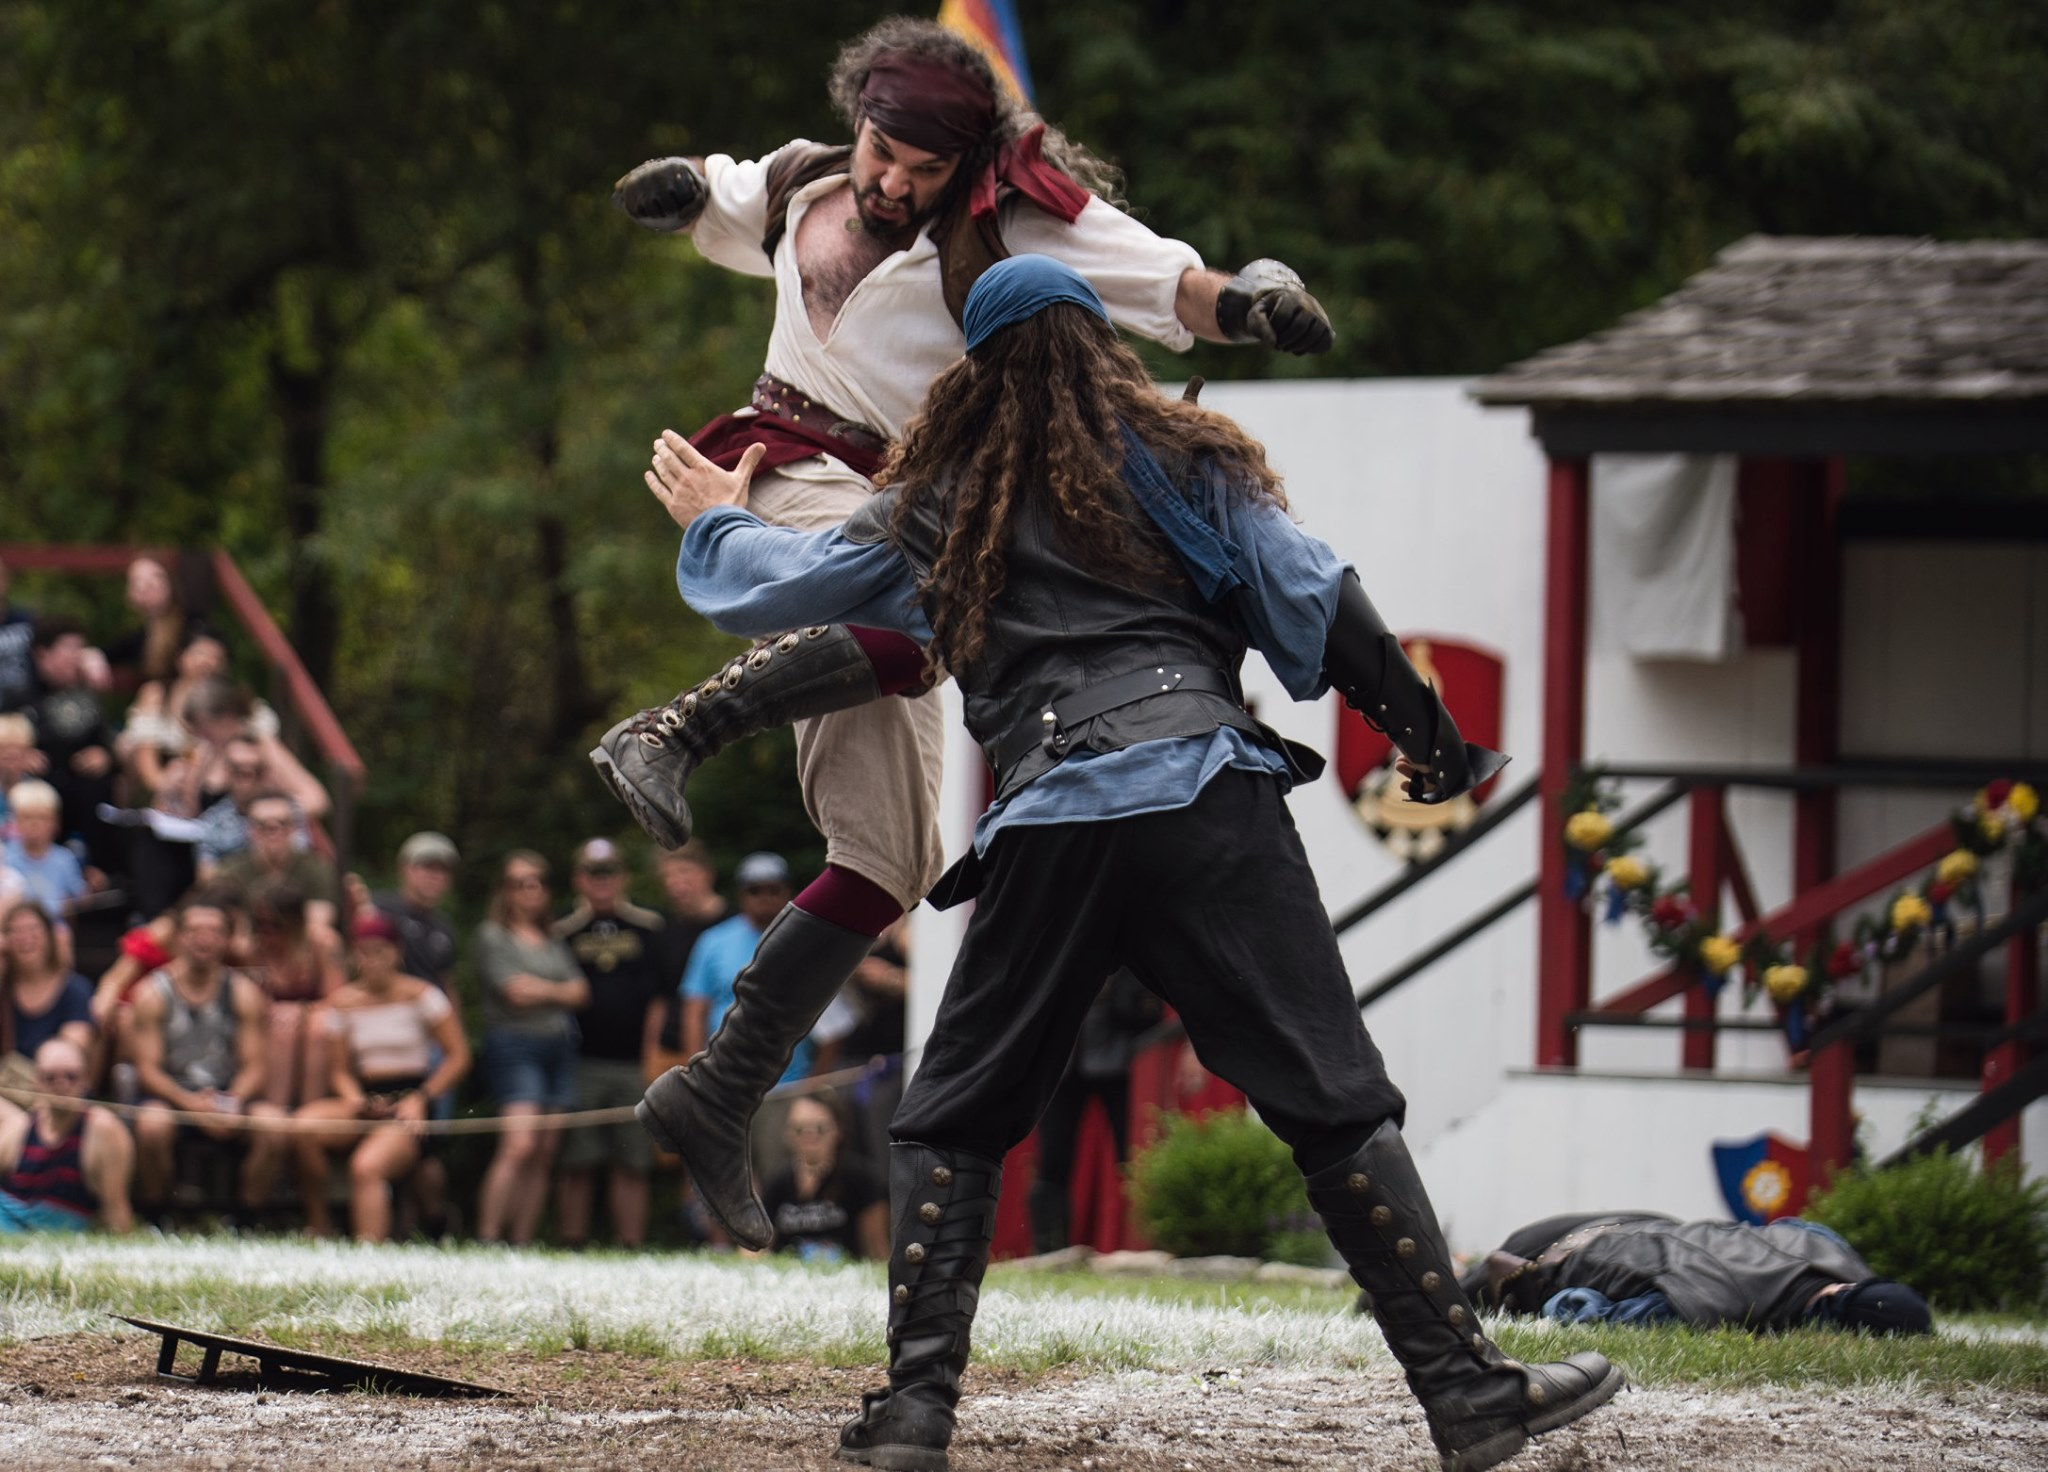 Immersive Character Improv and Professional Stage Combat